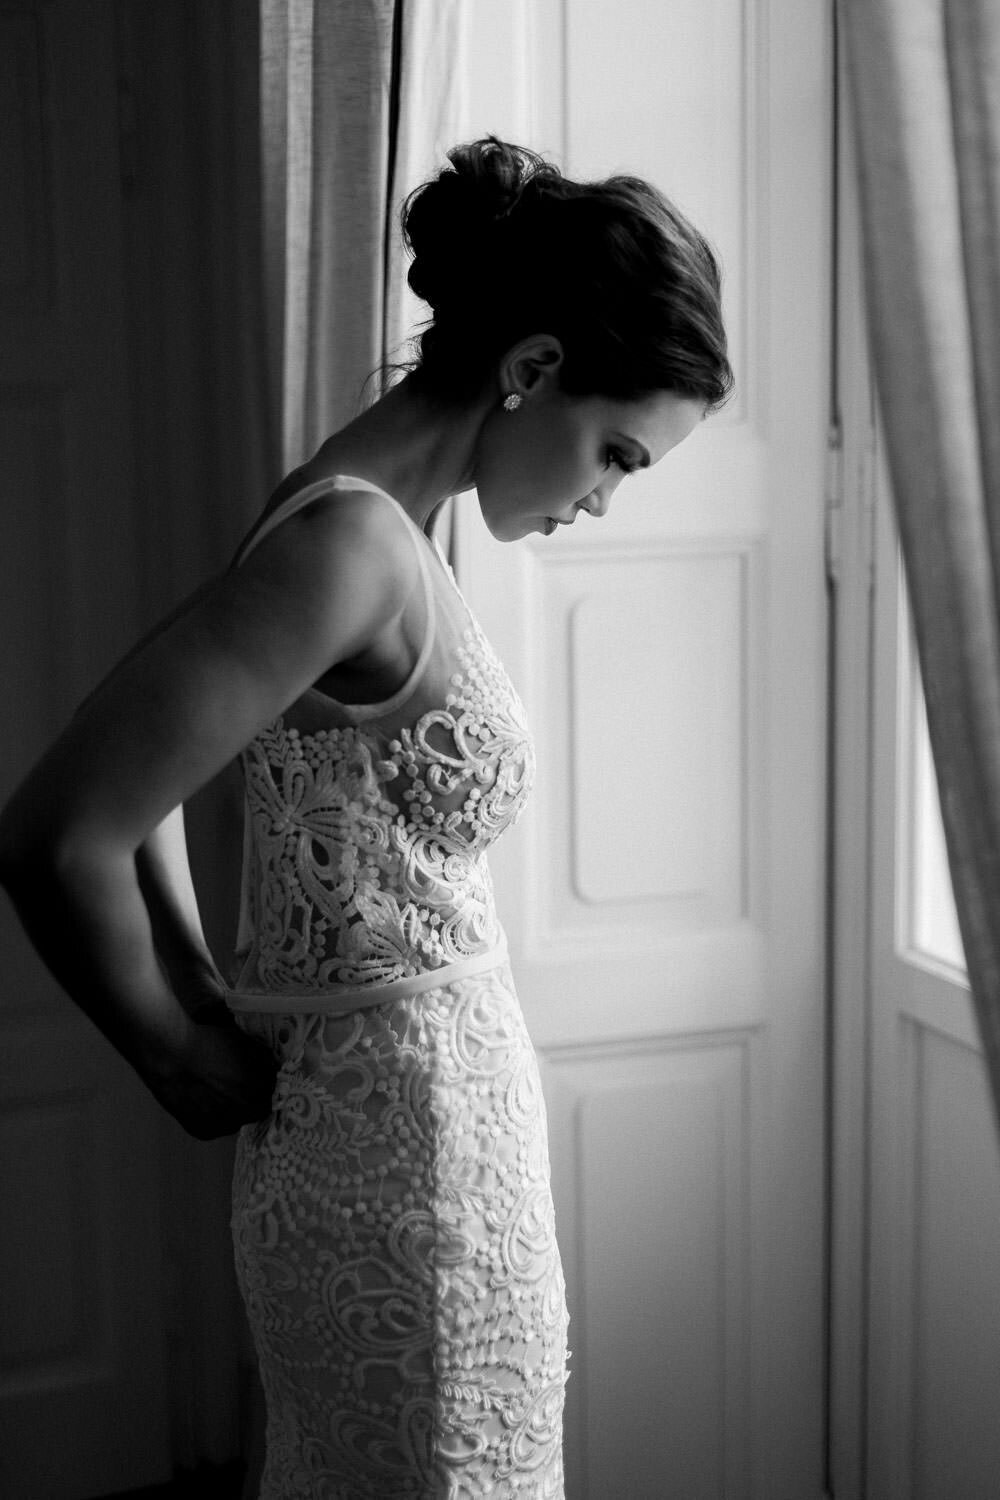 bride bride putting on white lace wedding dress by window before wedding ceremony in Lake Como Italy on white lace wedding dress by window before wedding ceremony in Lake Como Italy